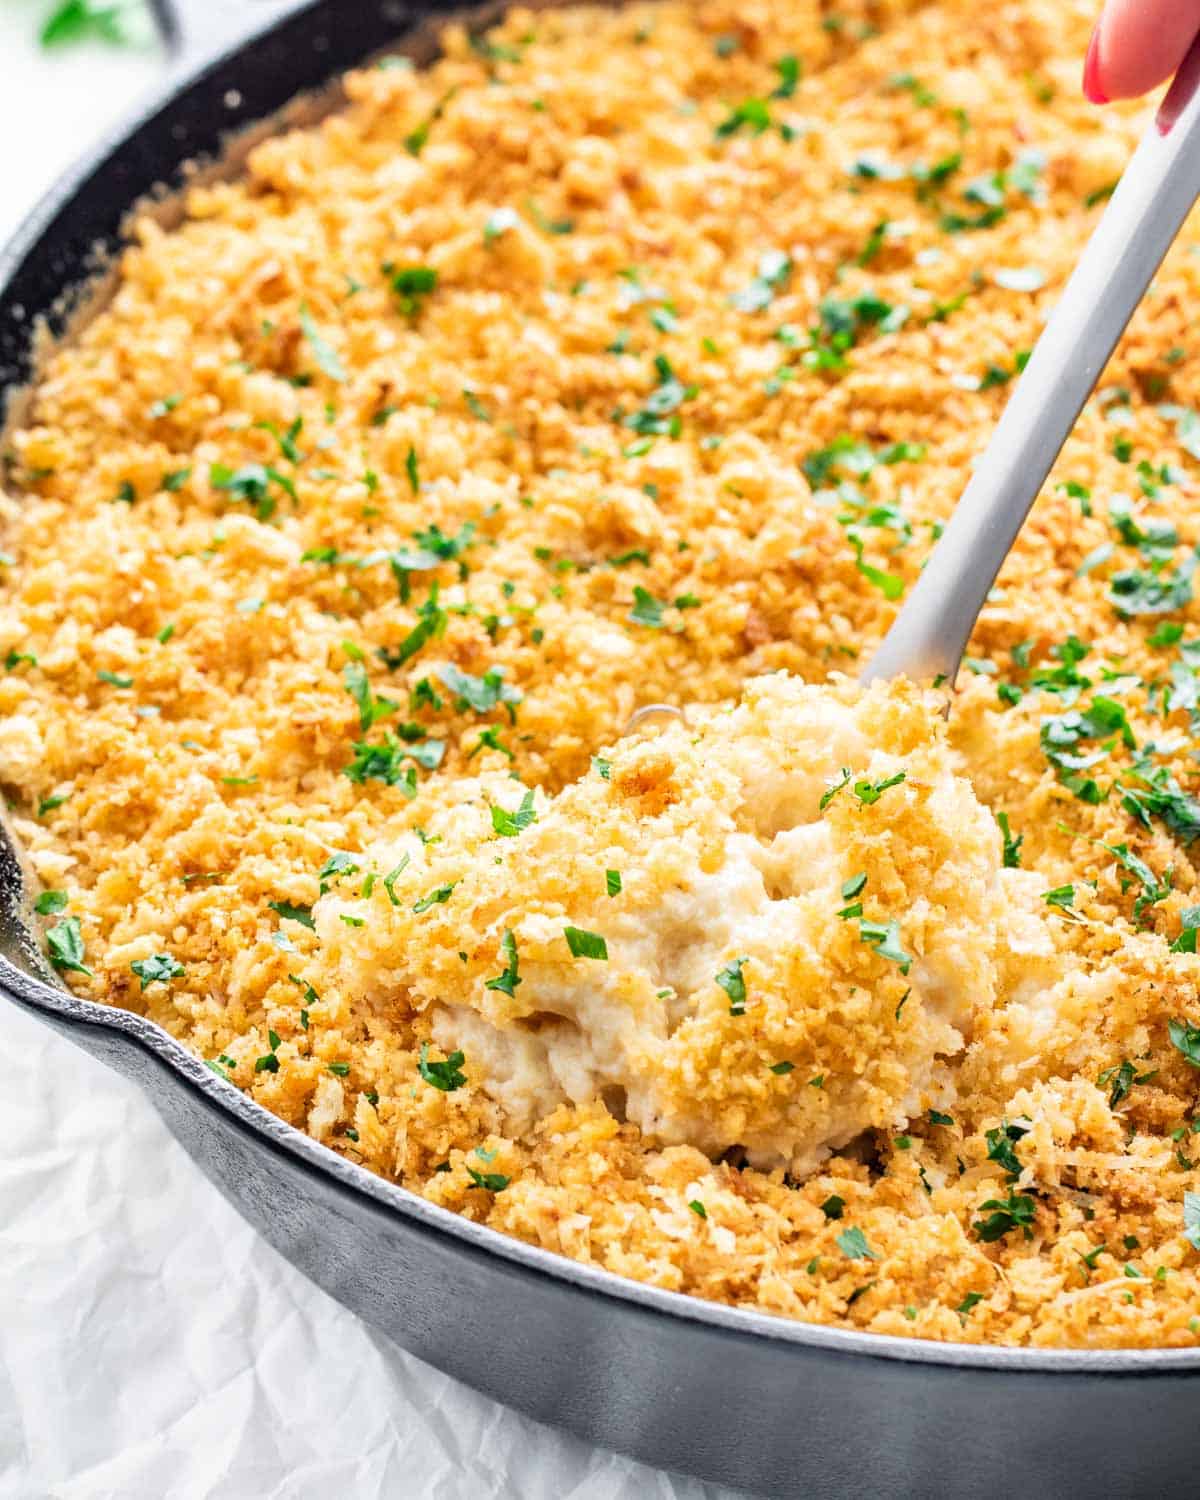 baked mac and cheese fresh out of the oven with a serving spoon inside and garnished with parsley